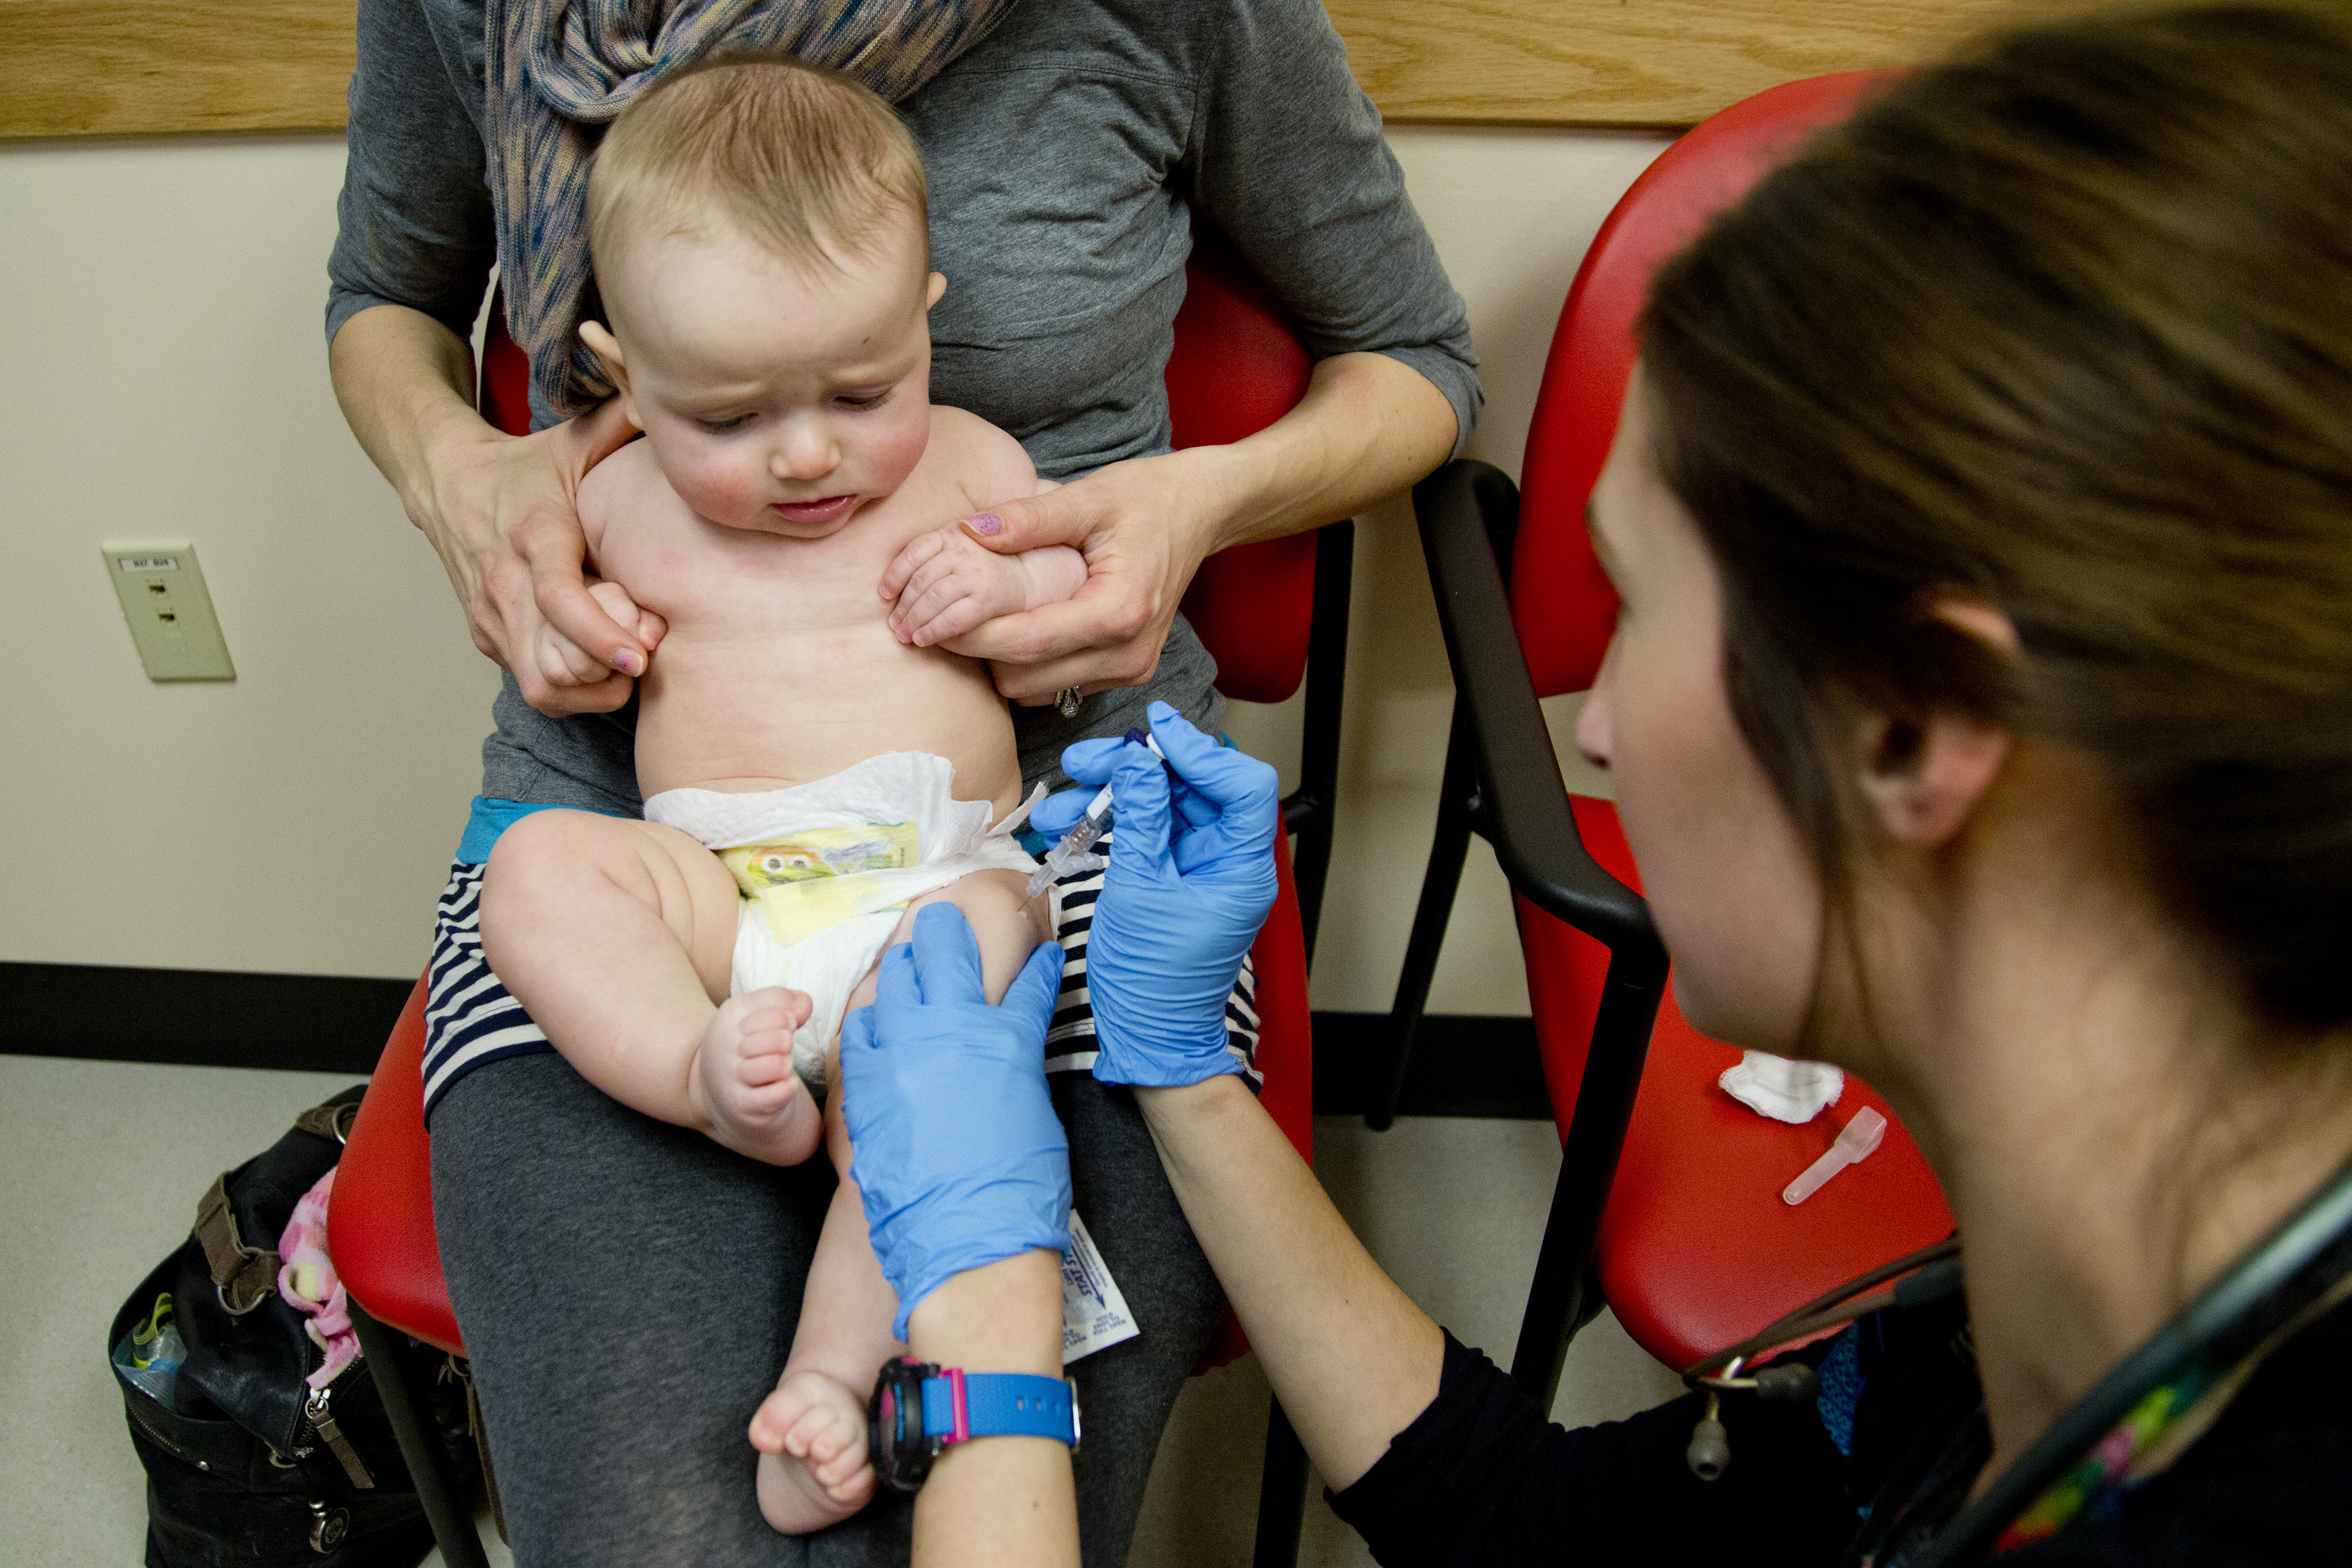 Sad baby, but smart mom: a child is vaccinated against meningitis in Portland, Me. (Portland Press Herald; Press Herald via Getty Images)